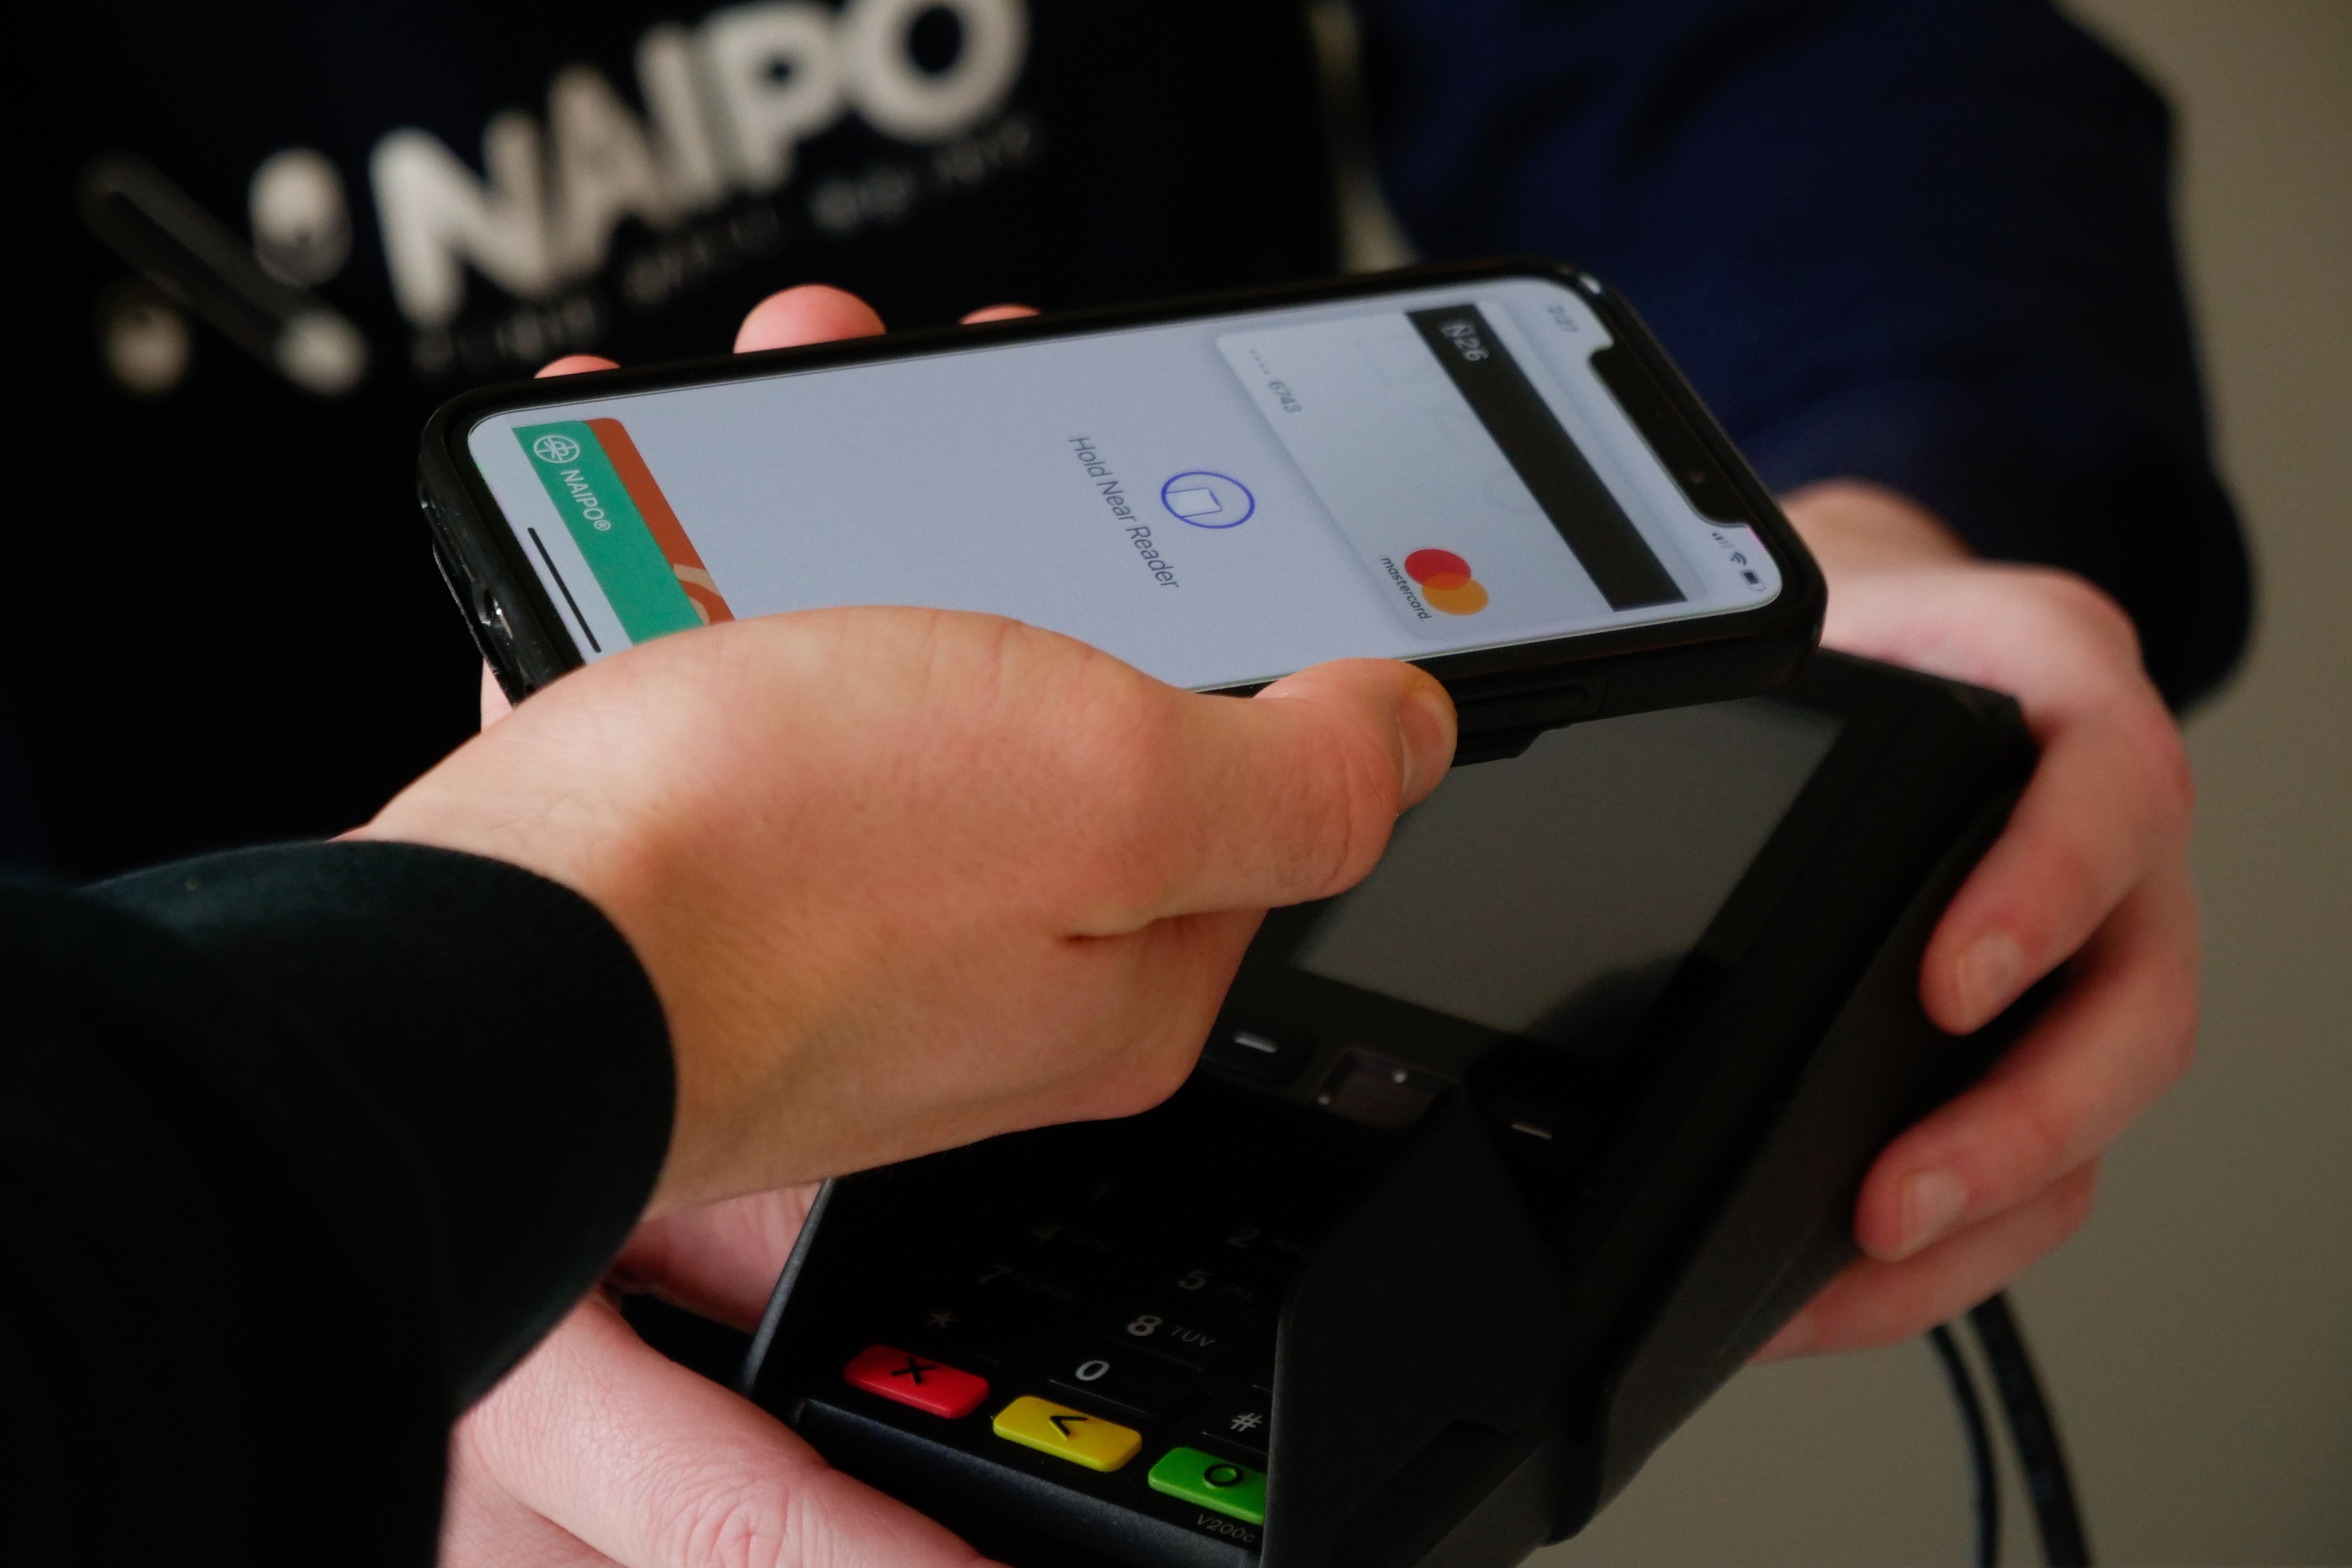 Credit Card and Payment Processing Industry Overview (and What to Expect in the Future)